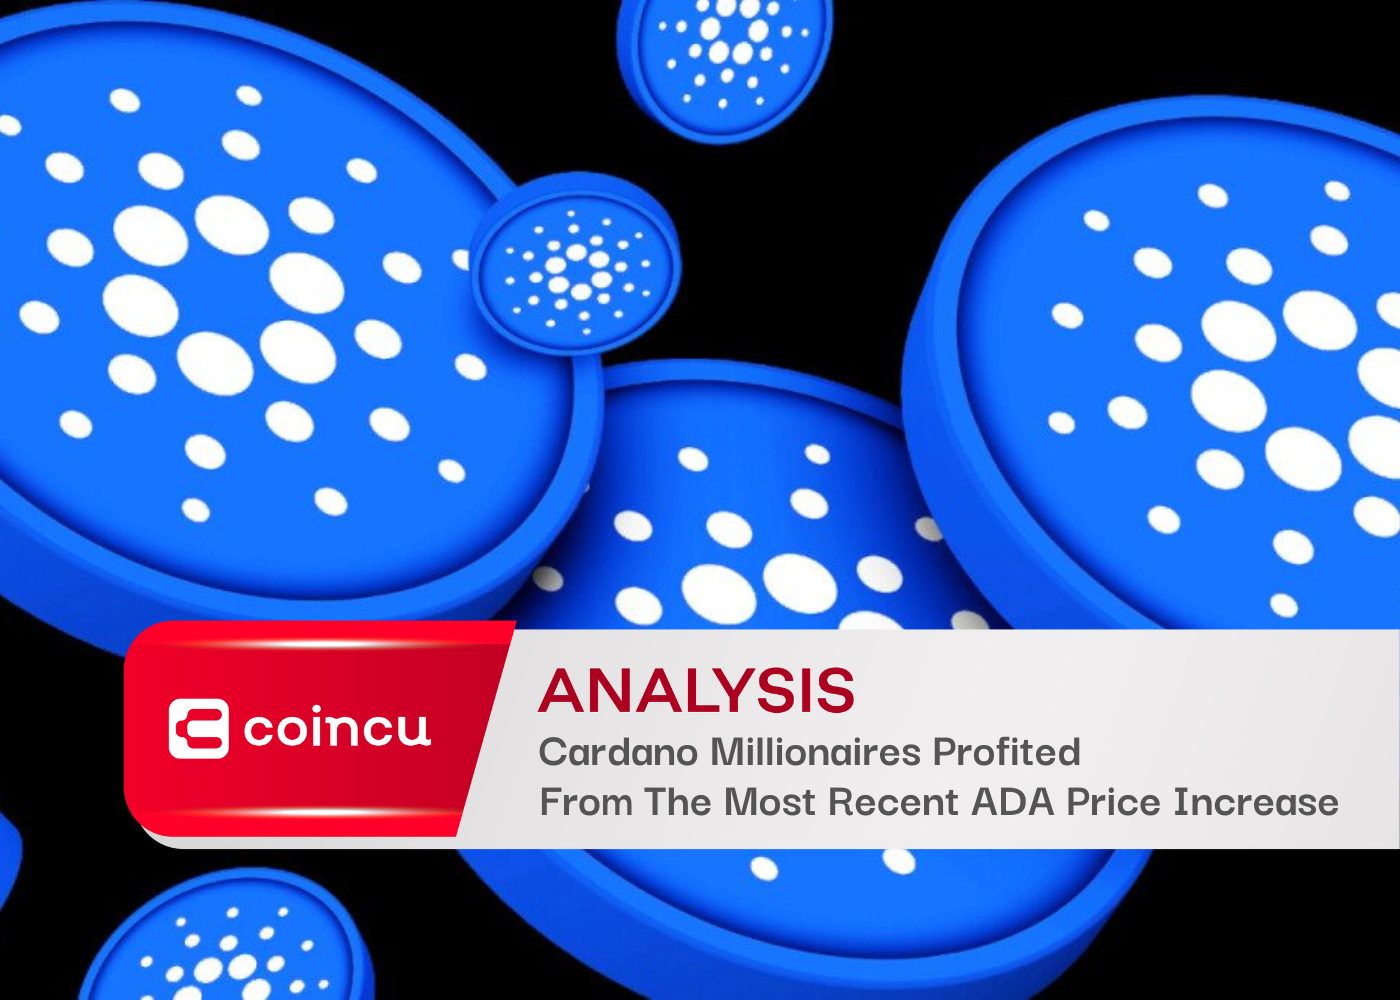 Cardano Millionaires Profited From The Most Recent ADA Price Increase - CoinCu News